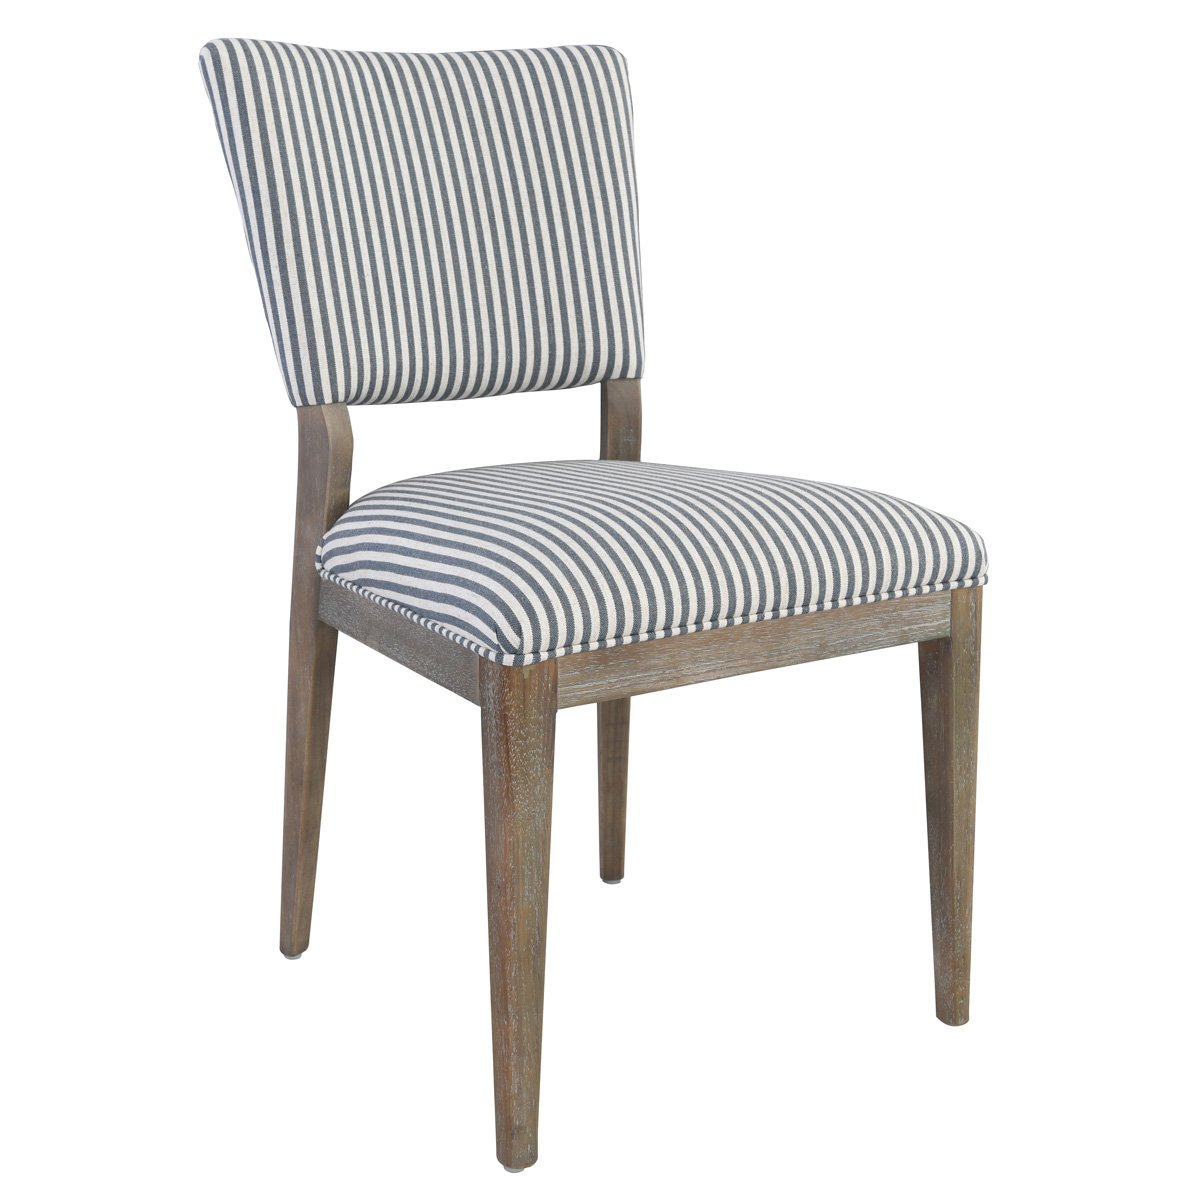 Phillip Upholstered Dining Chair, Striped